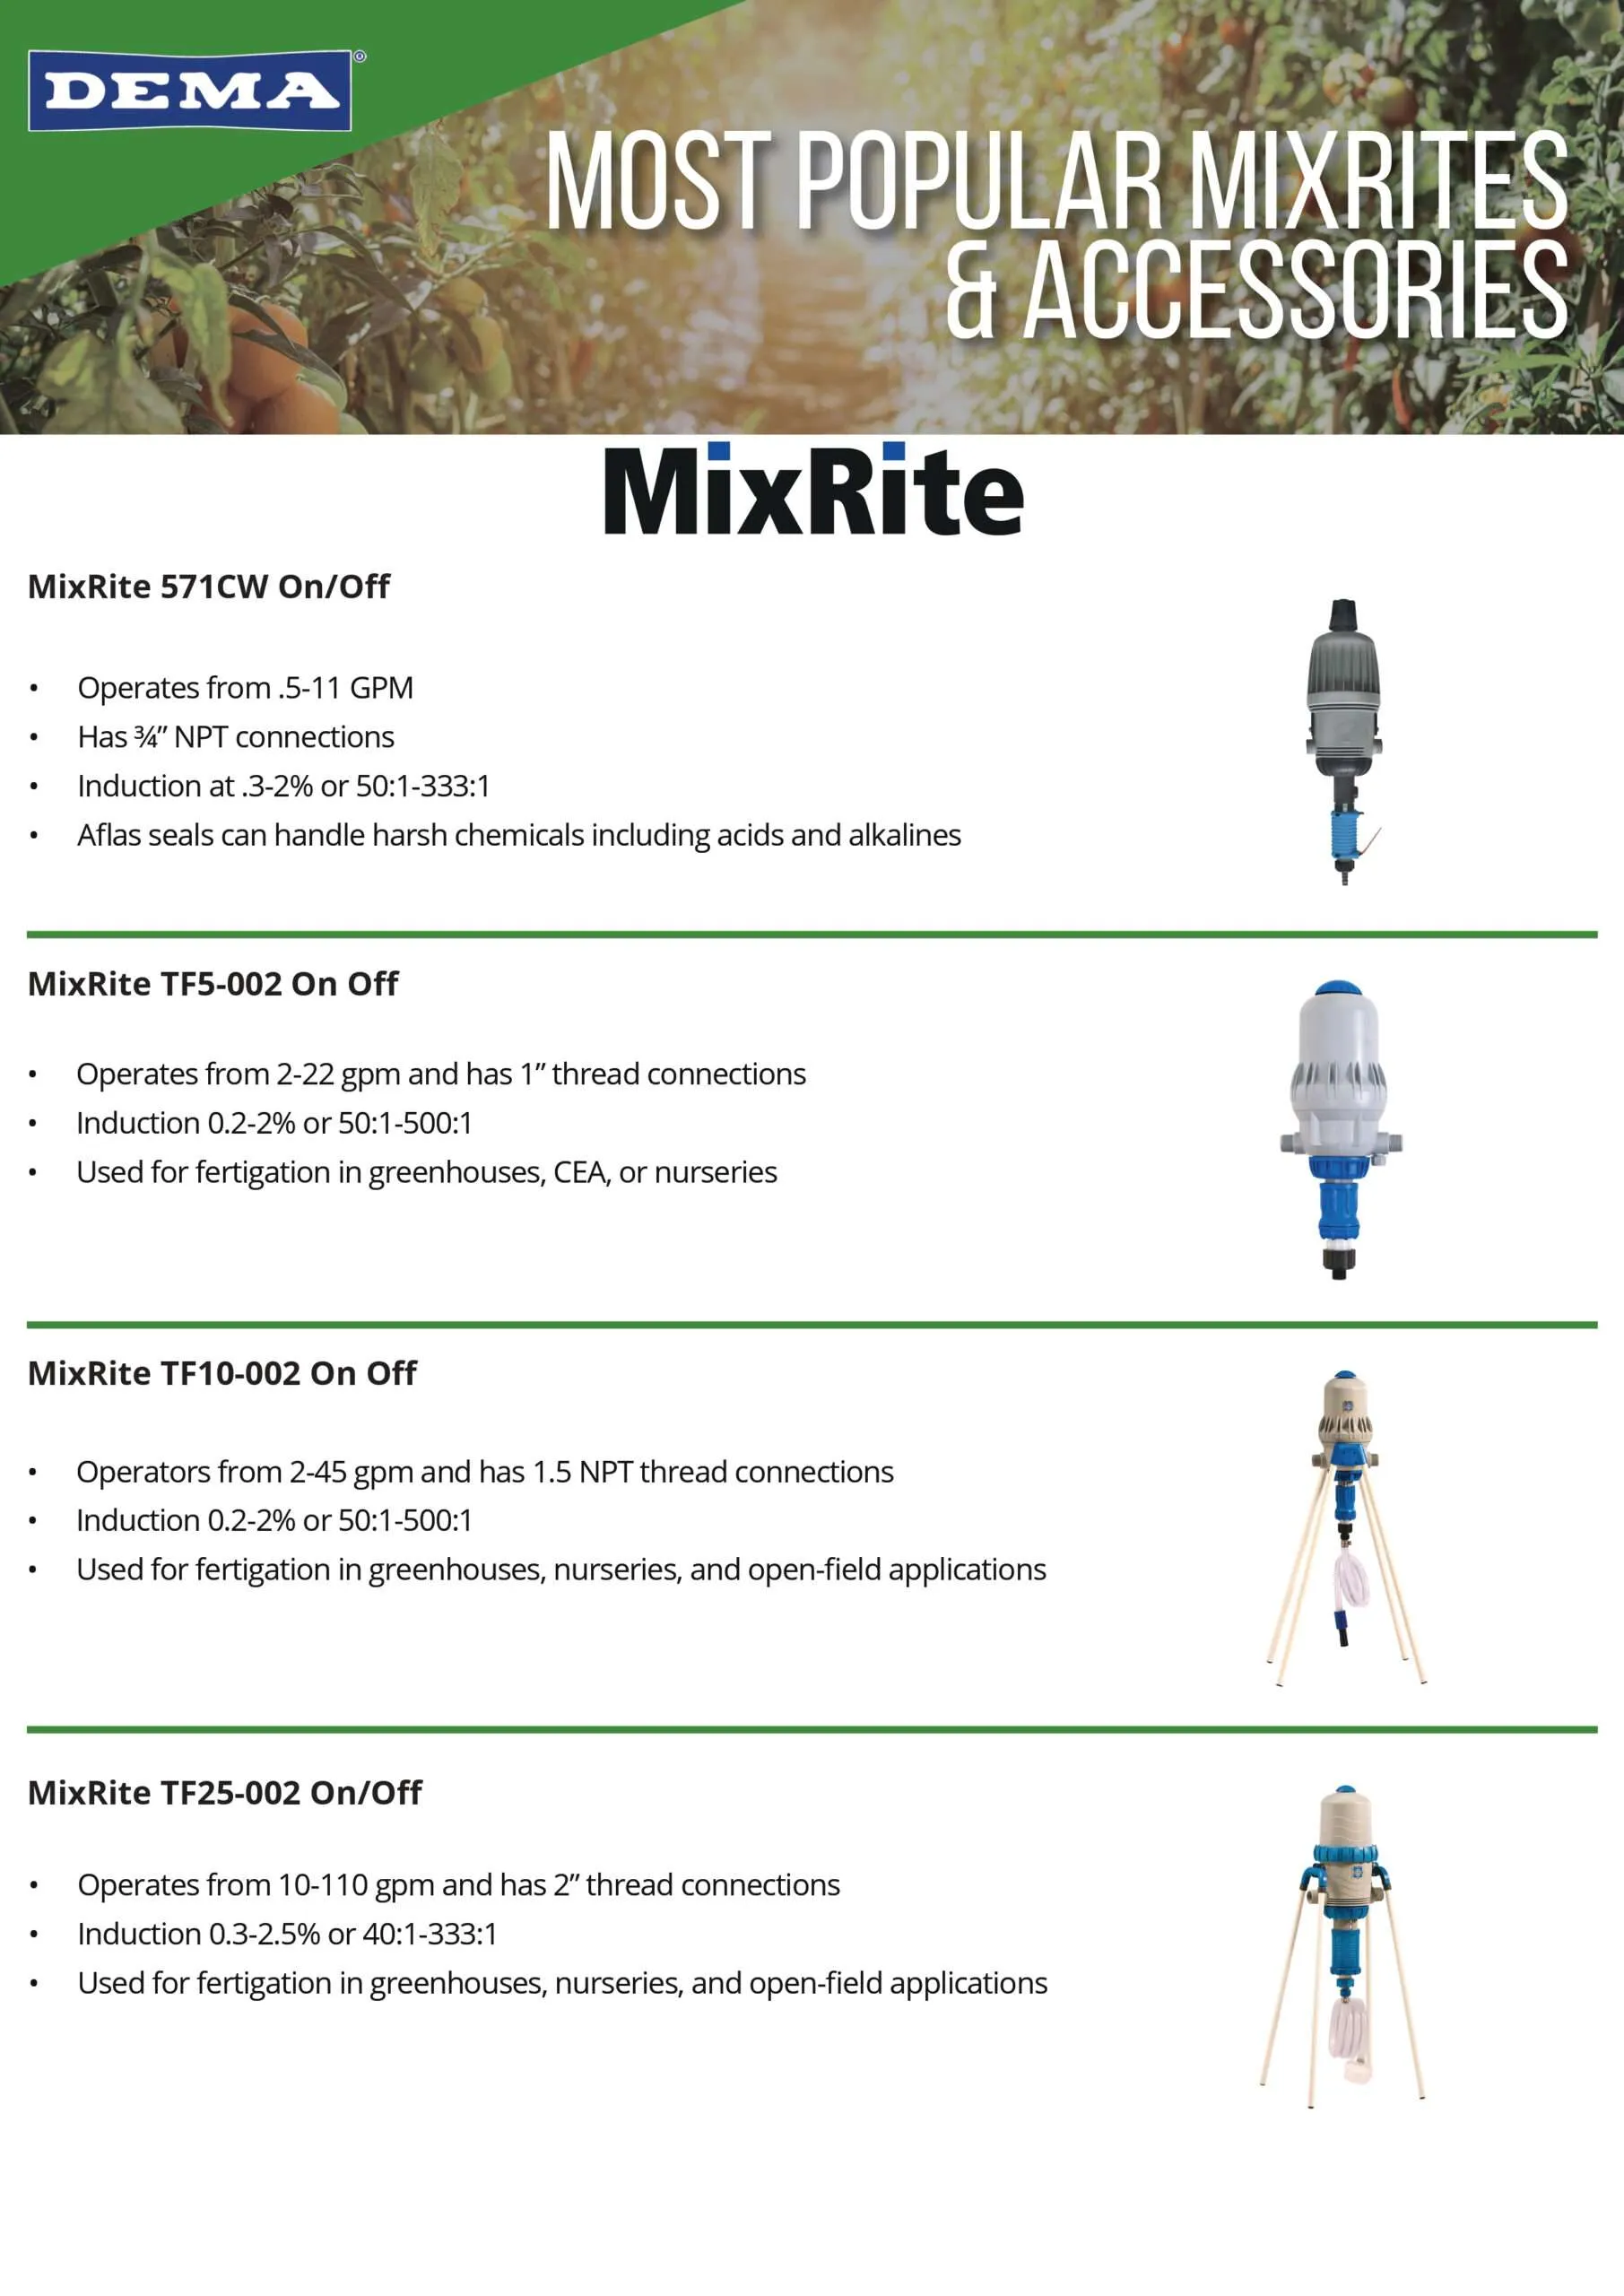 MixRite Most Popular and Accessories